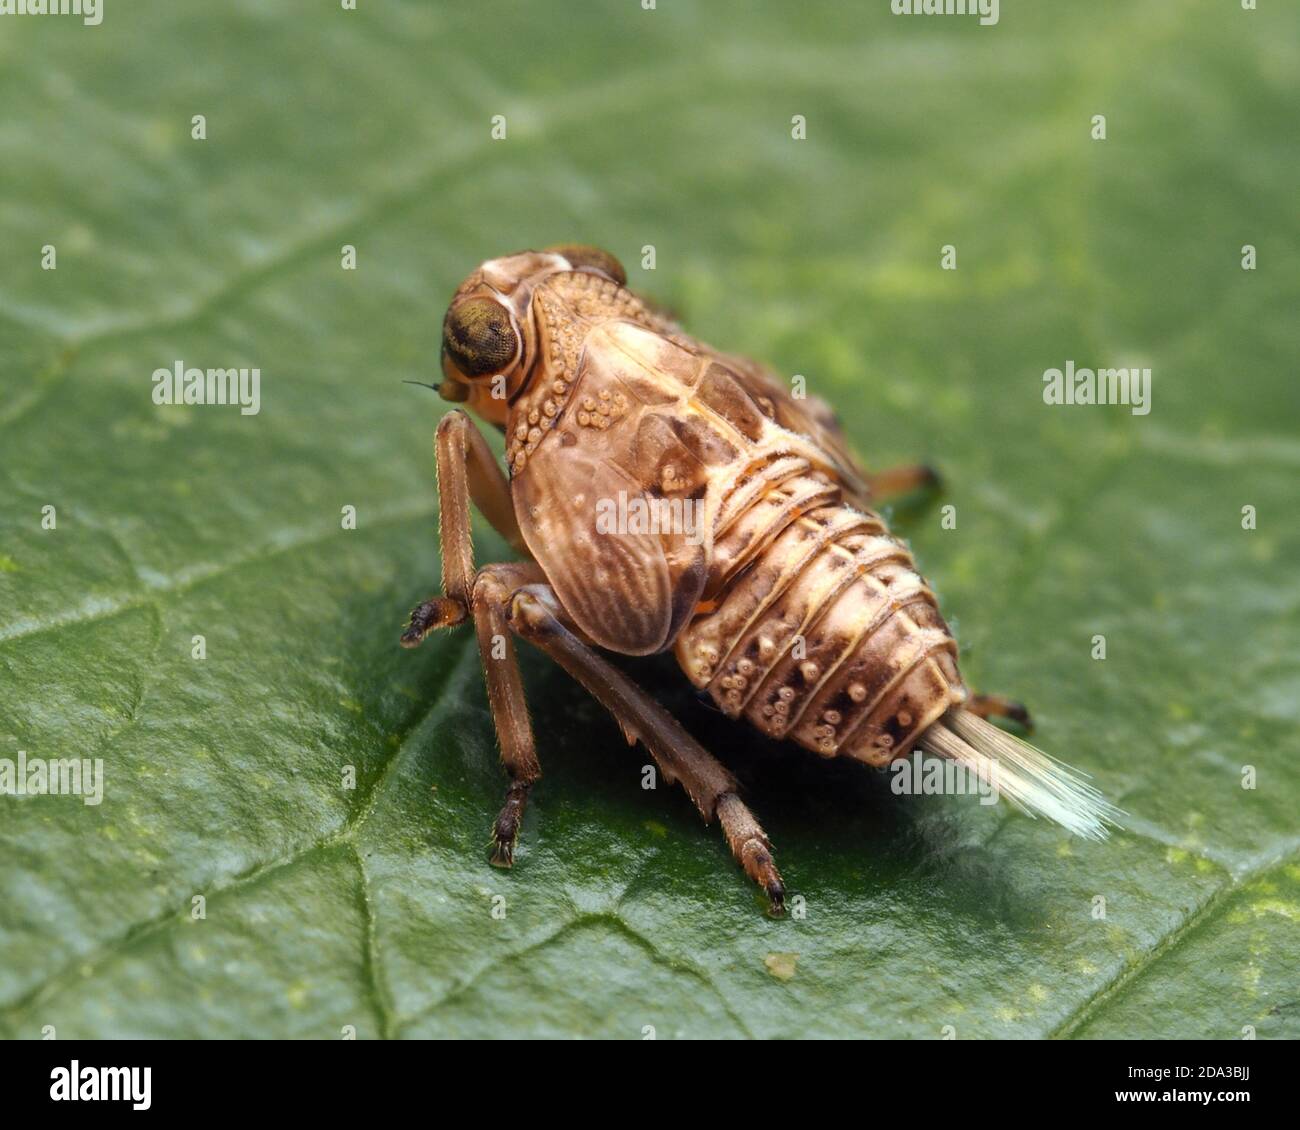 Issus coleoptratus planthopper nymph resting on ivy leaf. Tipperary,Ireland Stock Photo